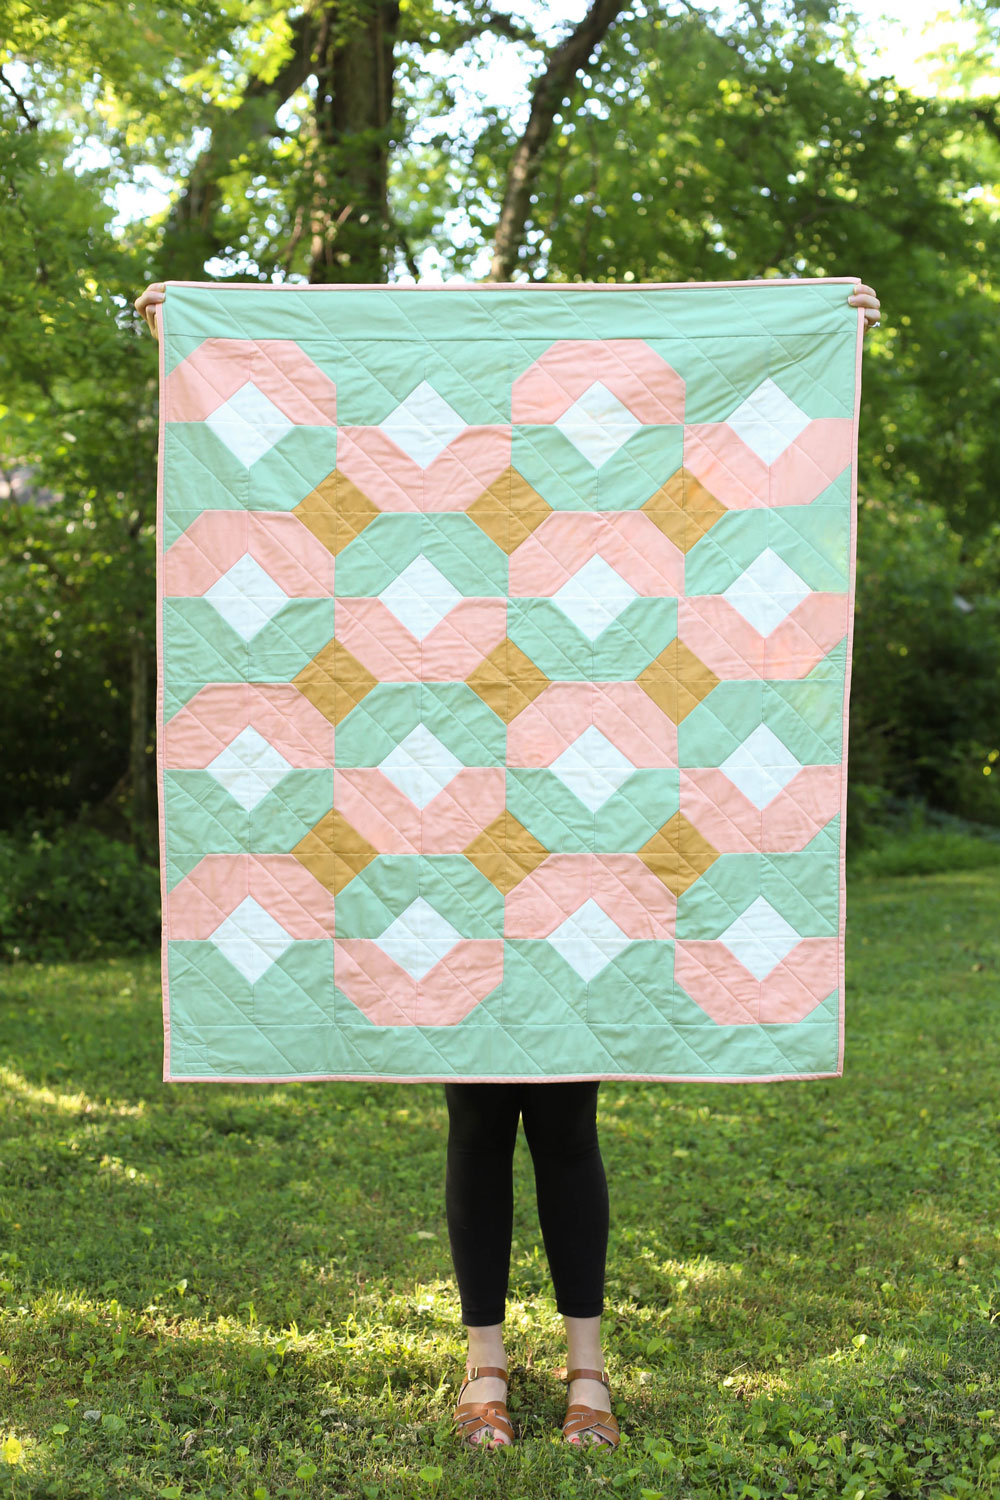 This pink and mint green baby quilt is perfect for sping! The Glitter and Glow quilt pattern comes in king through baby quilt sizes and is beginner friendly.